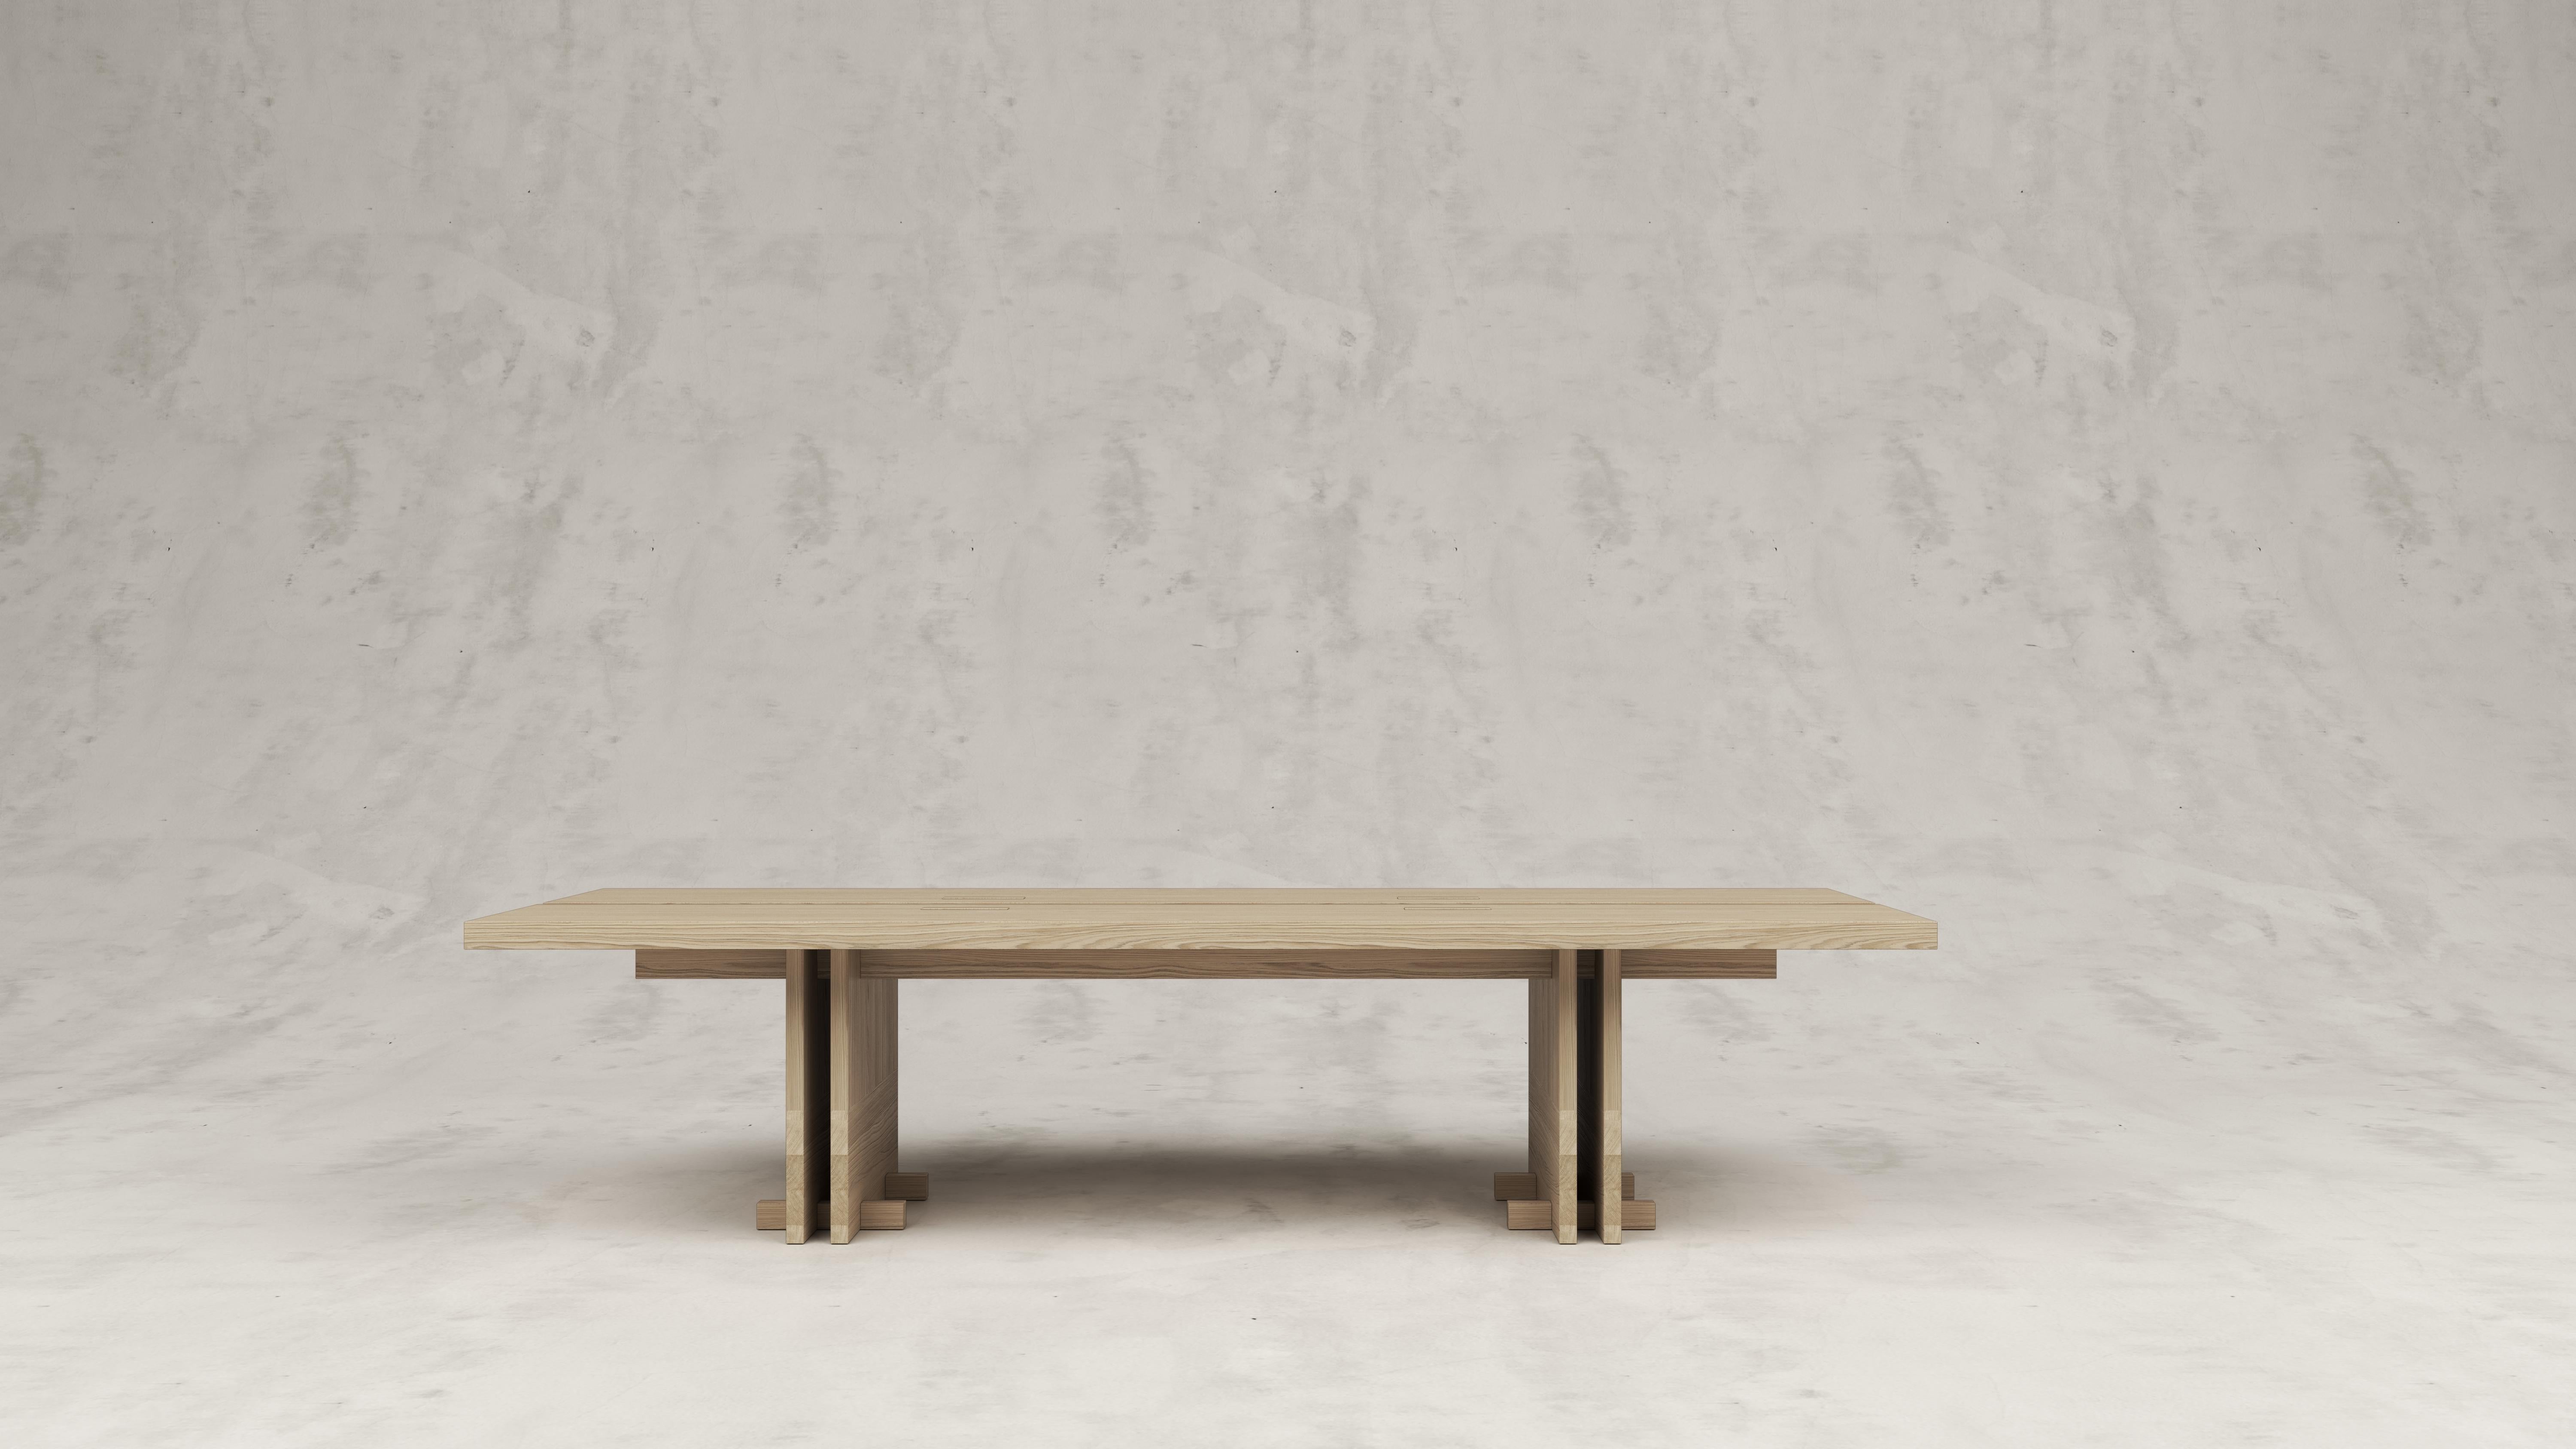 Rift wood grain dining table by Andy Kerstens
Dimensions: W 240 x D 98 x H 74 cm
Materials: White washed larch, metal.
Optional little feet at table legs, detail of rotation of wood grain halfway the table legs.
Handmade in Belgium

Available